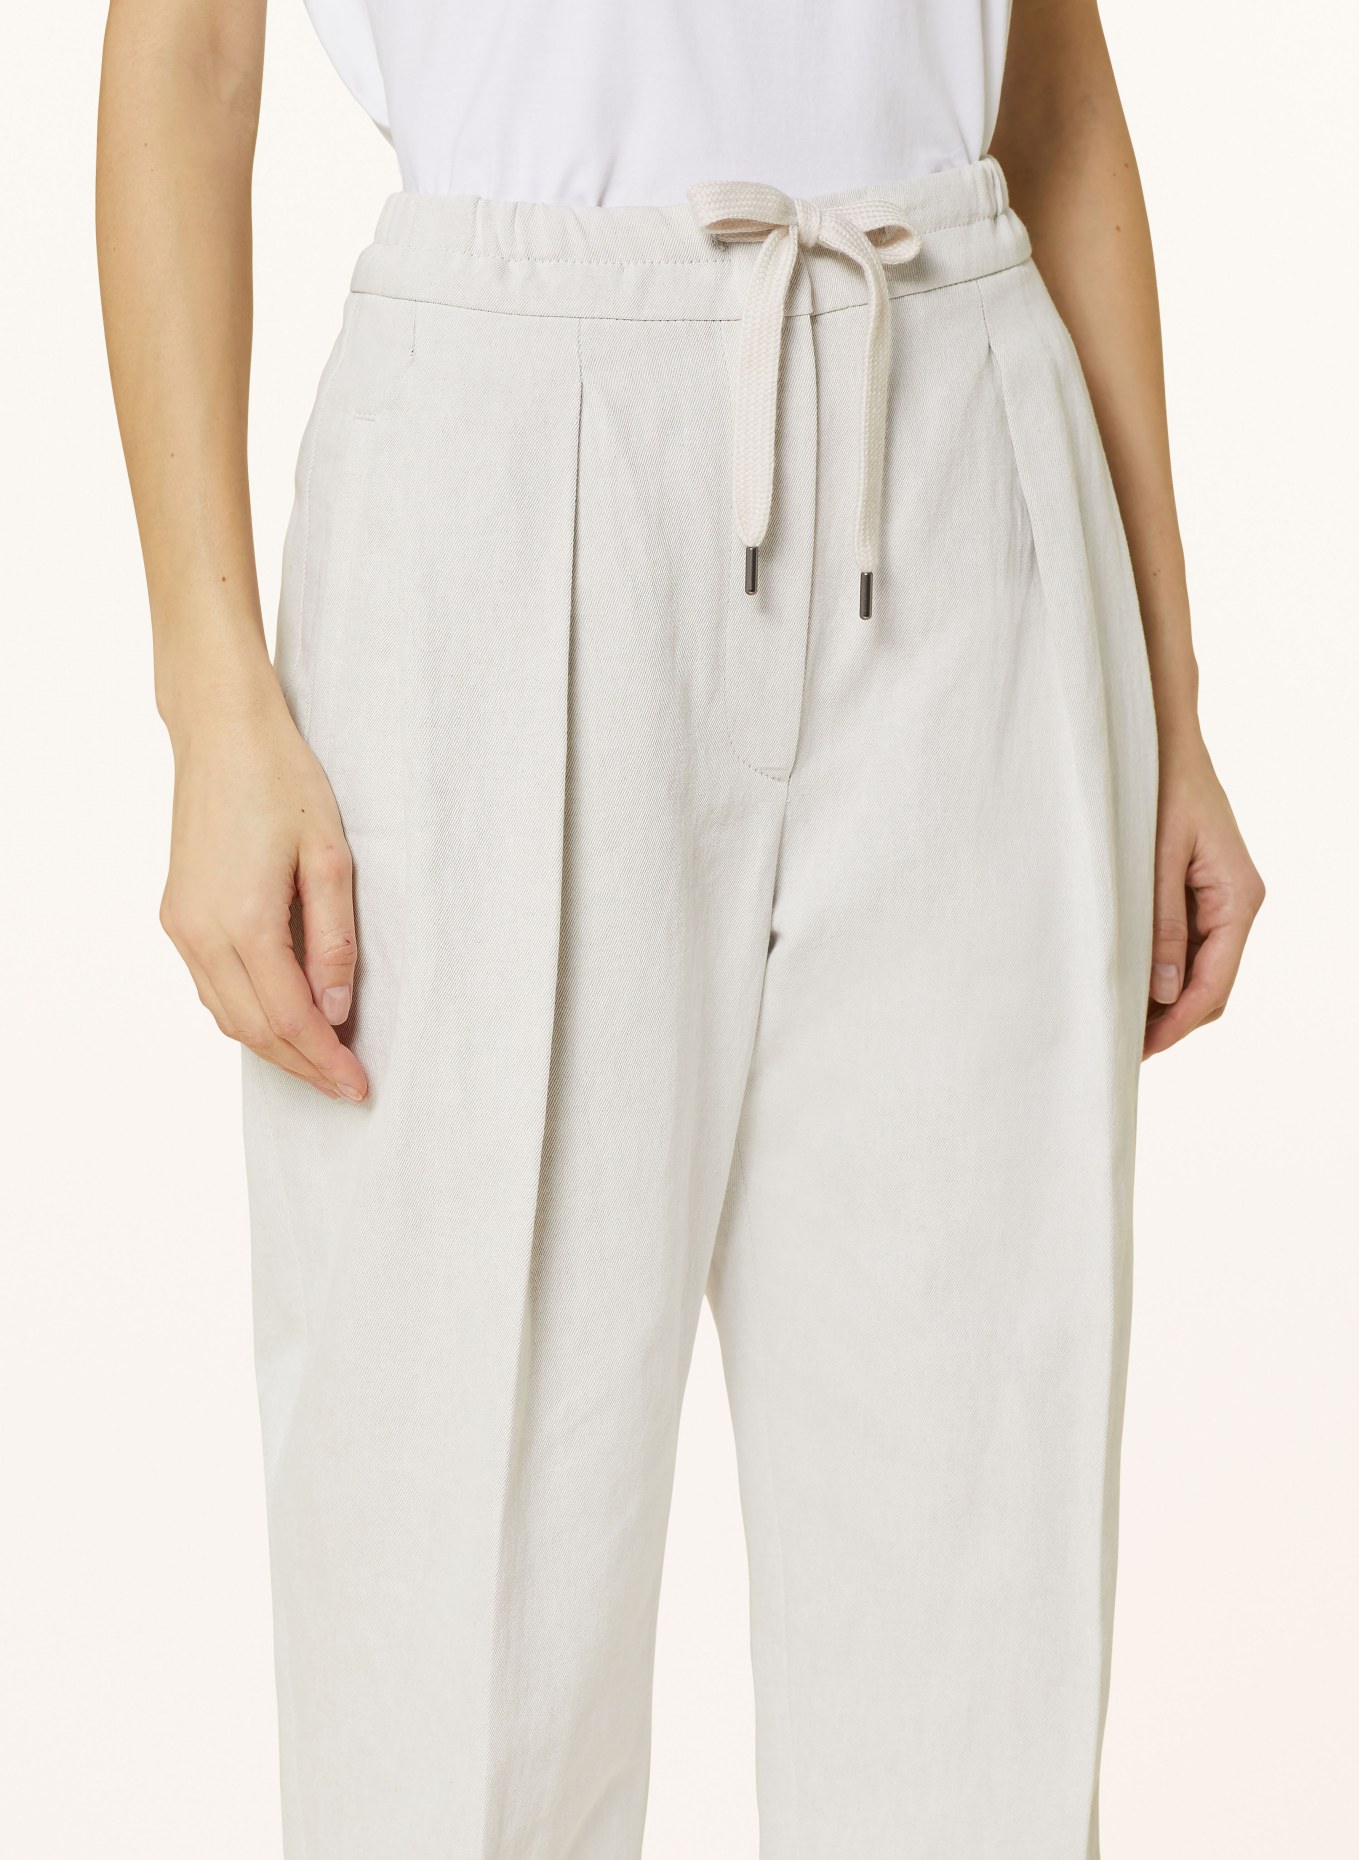 BRUNELLO CUCINELLI Pants in jogger style, Color: LIGHT GRAY (Image 5)